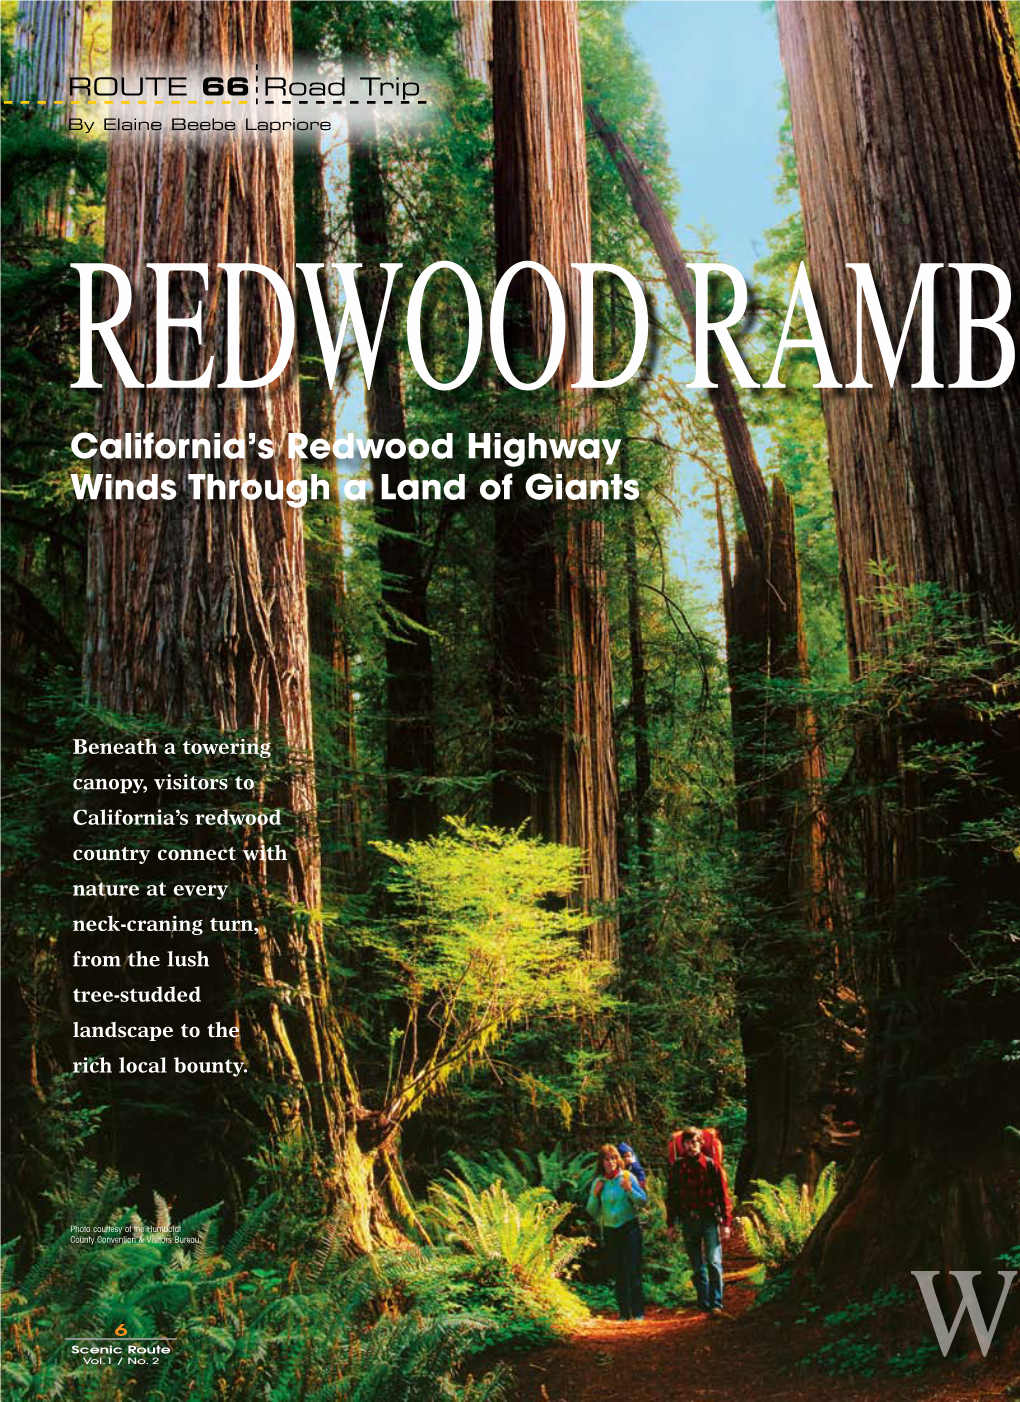 California's Redwood Highway Winds Through a Land of Giants